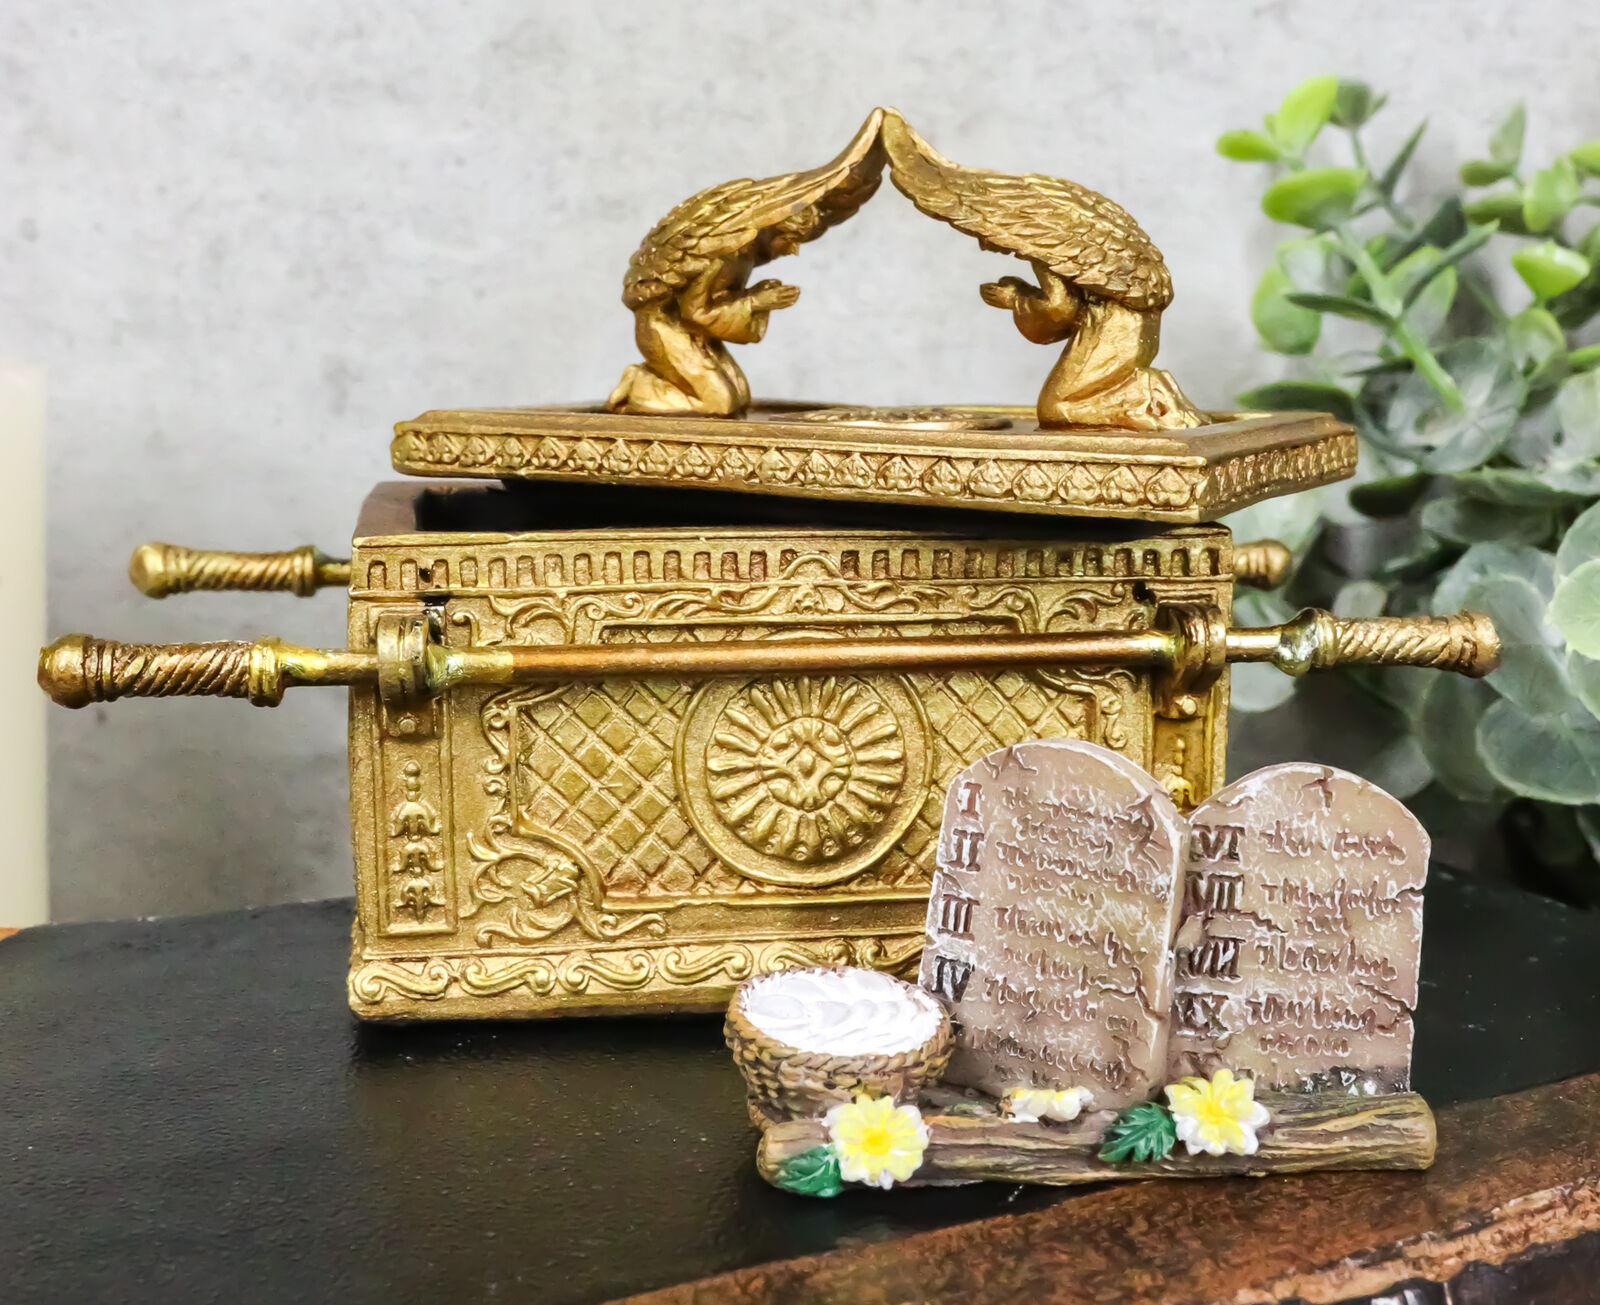 Matte Gold Ark Of The Covenant Model With Contents Figurine Decorative Box 1:16